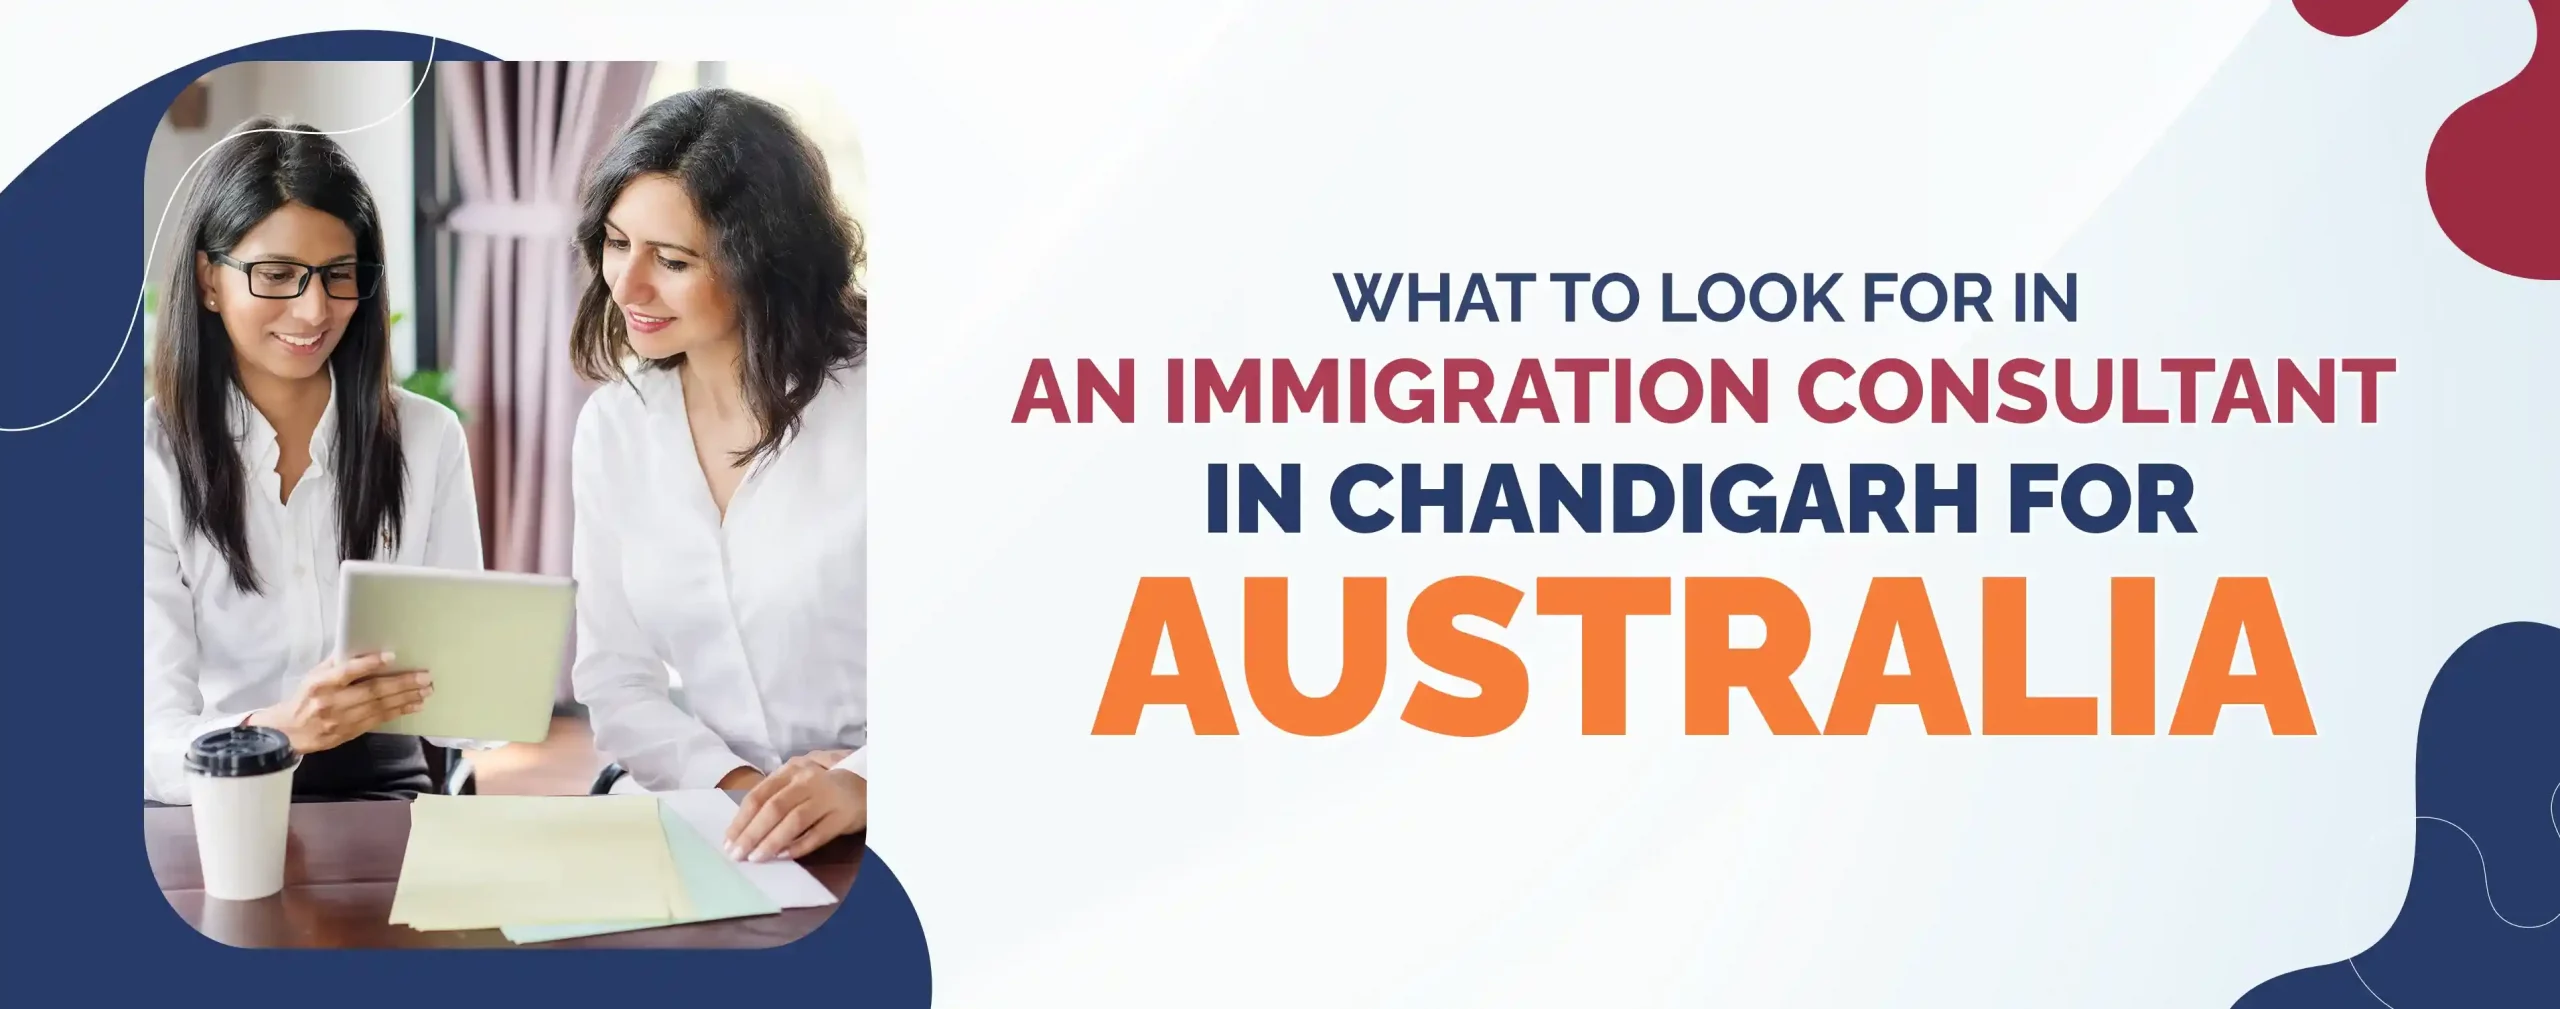 What to Look for in an Immigration Consultant in Chandigarh for Australia?